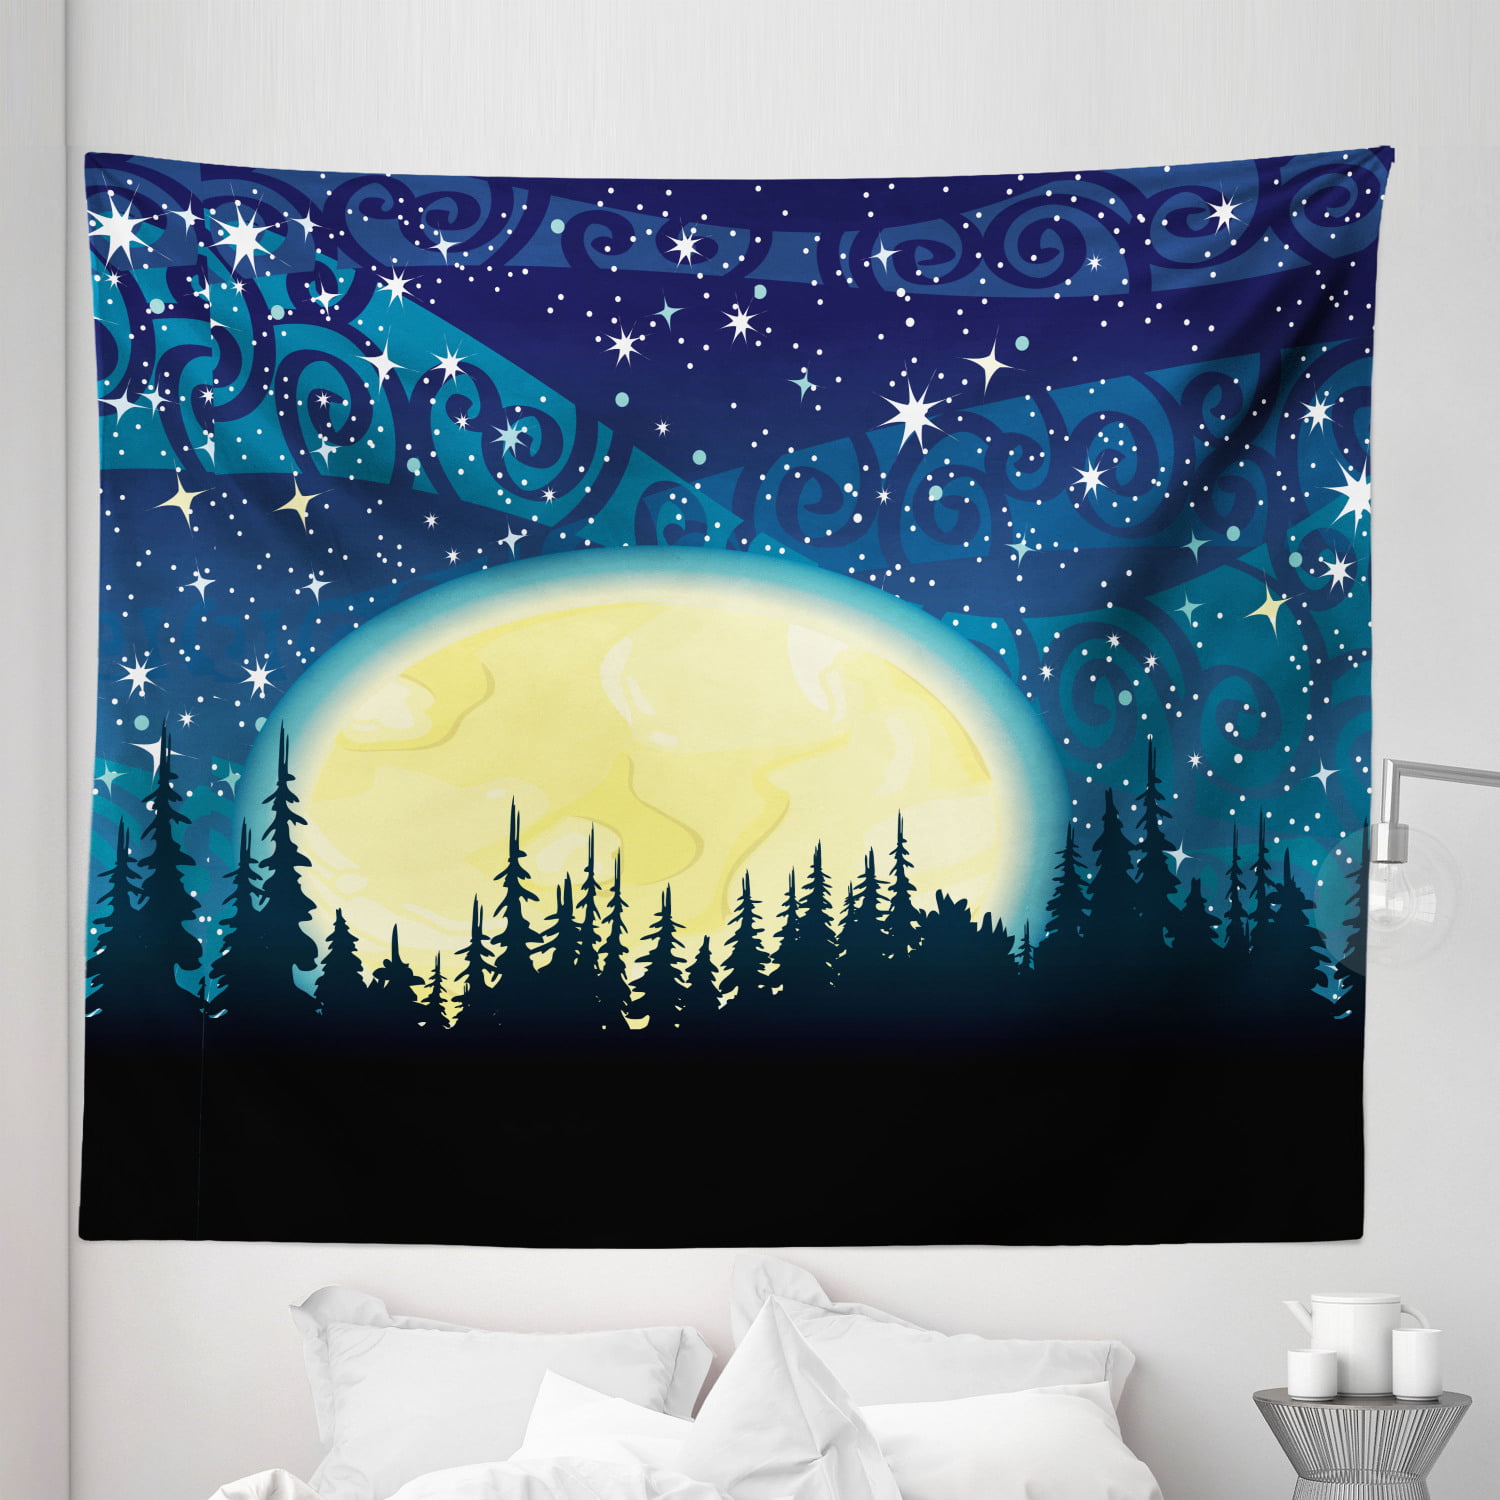 Night Dreamy Color Sky Forest Tapestry Bedroom Wall Hanging Home Dorm Room Decor 